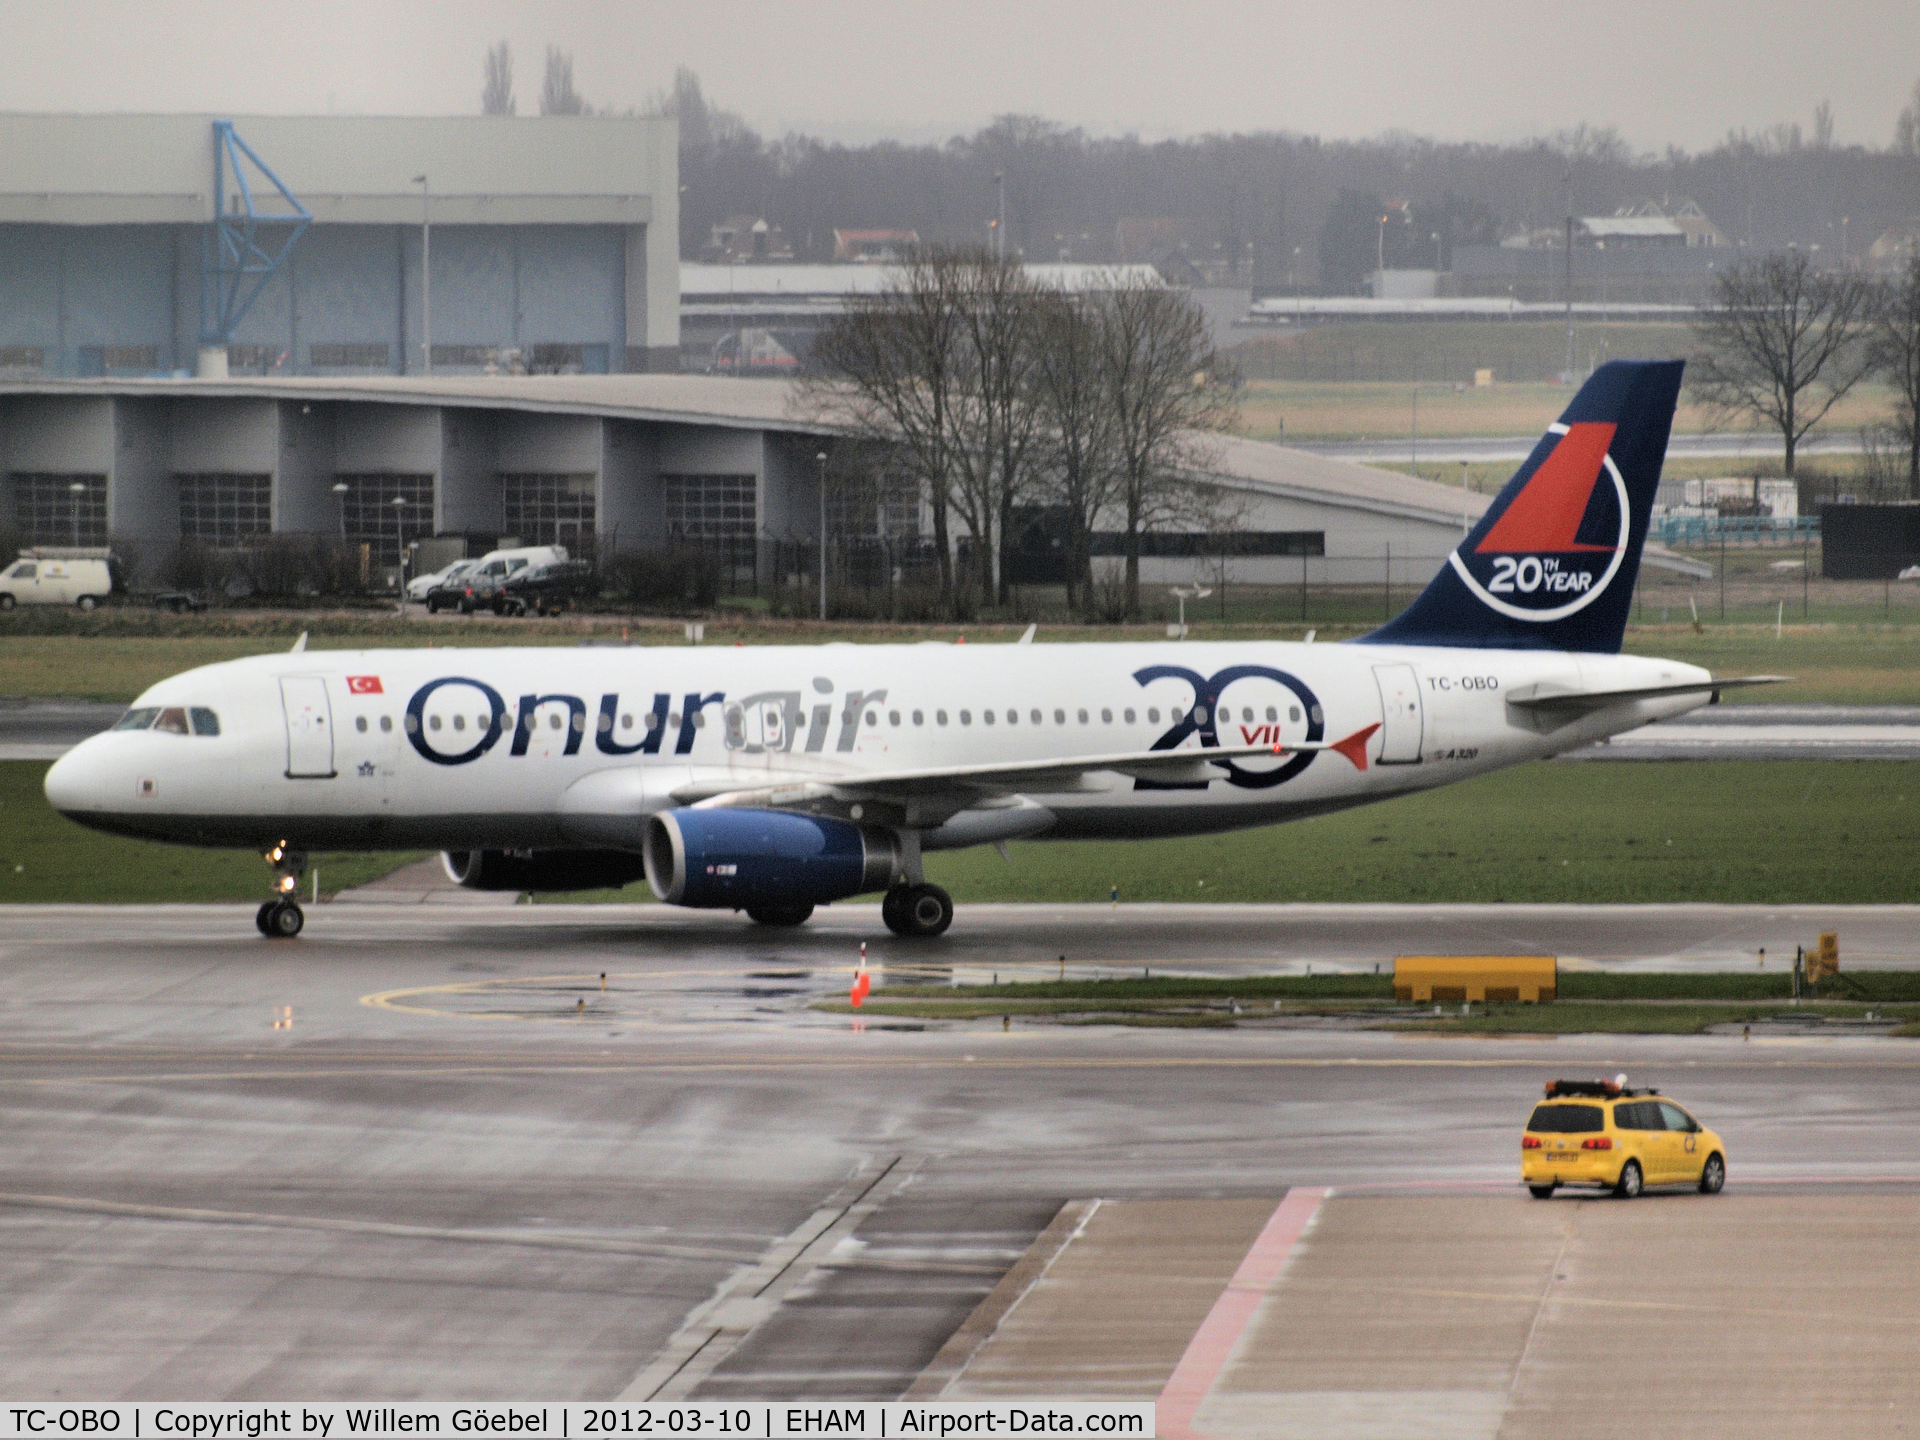 TC-OBO, 2006 Airbus A320-232 C/N 2688, Arrival on Schiphol Airport